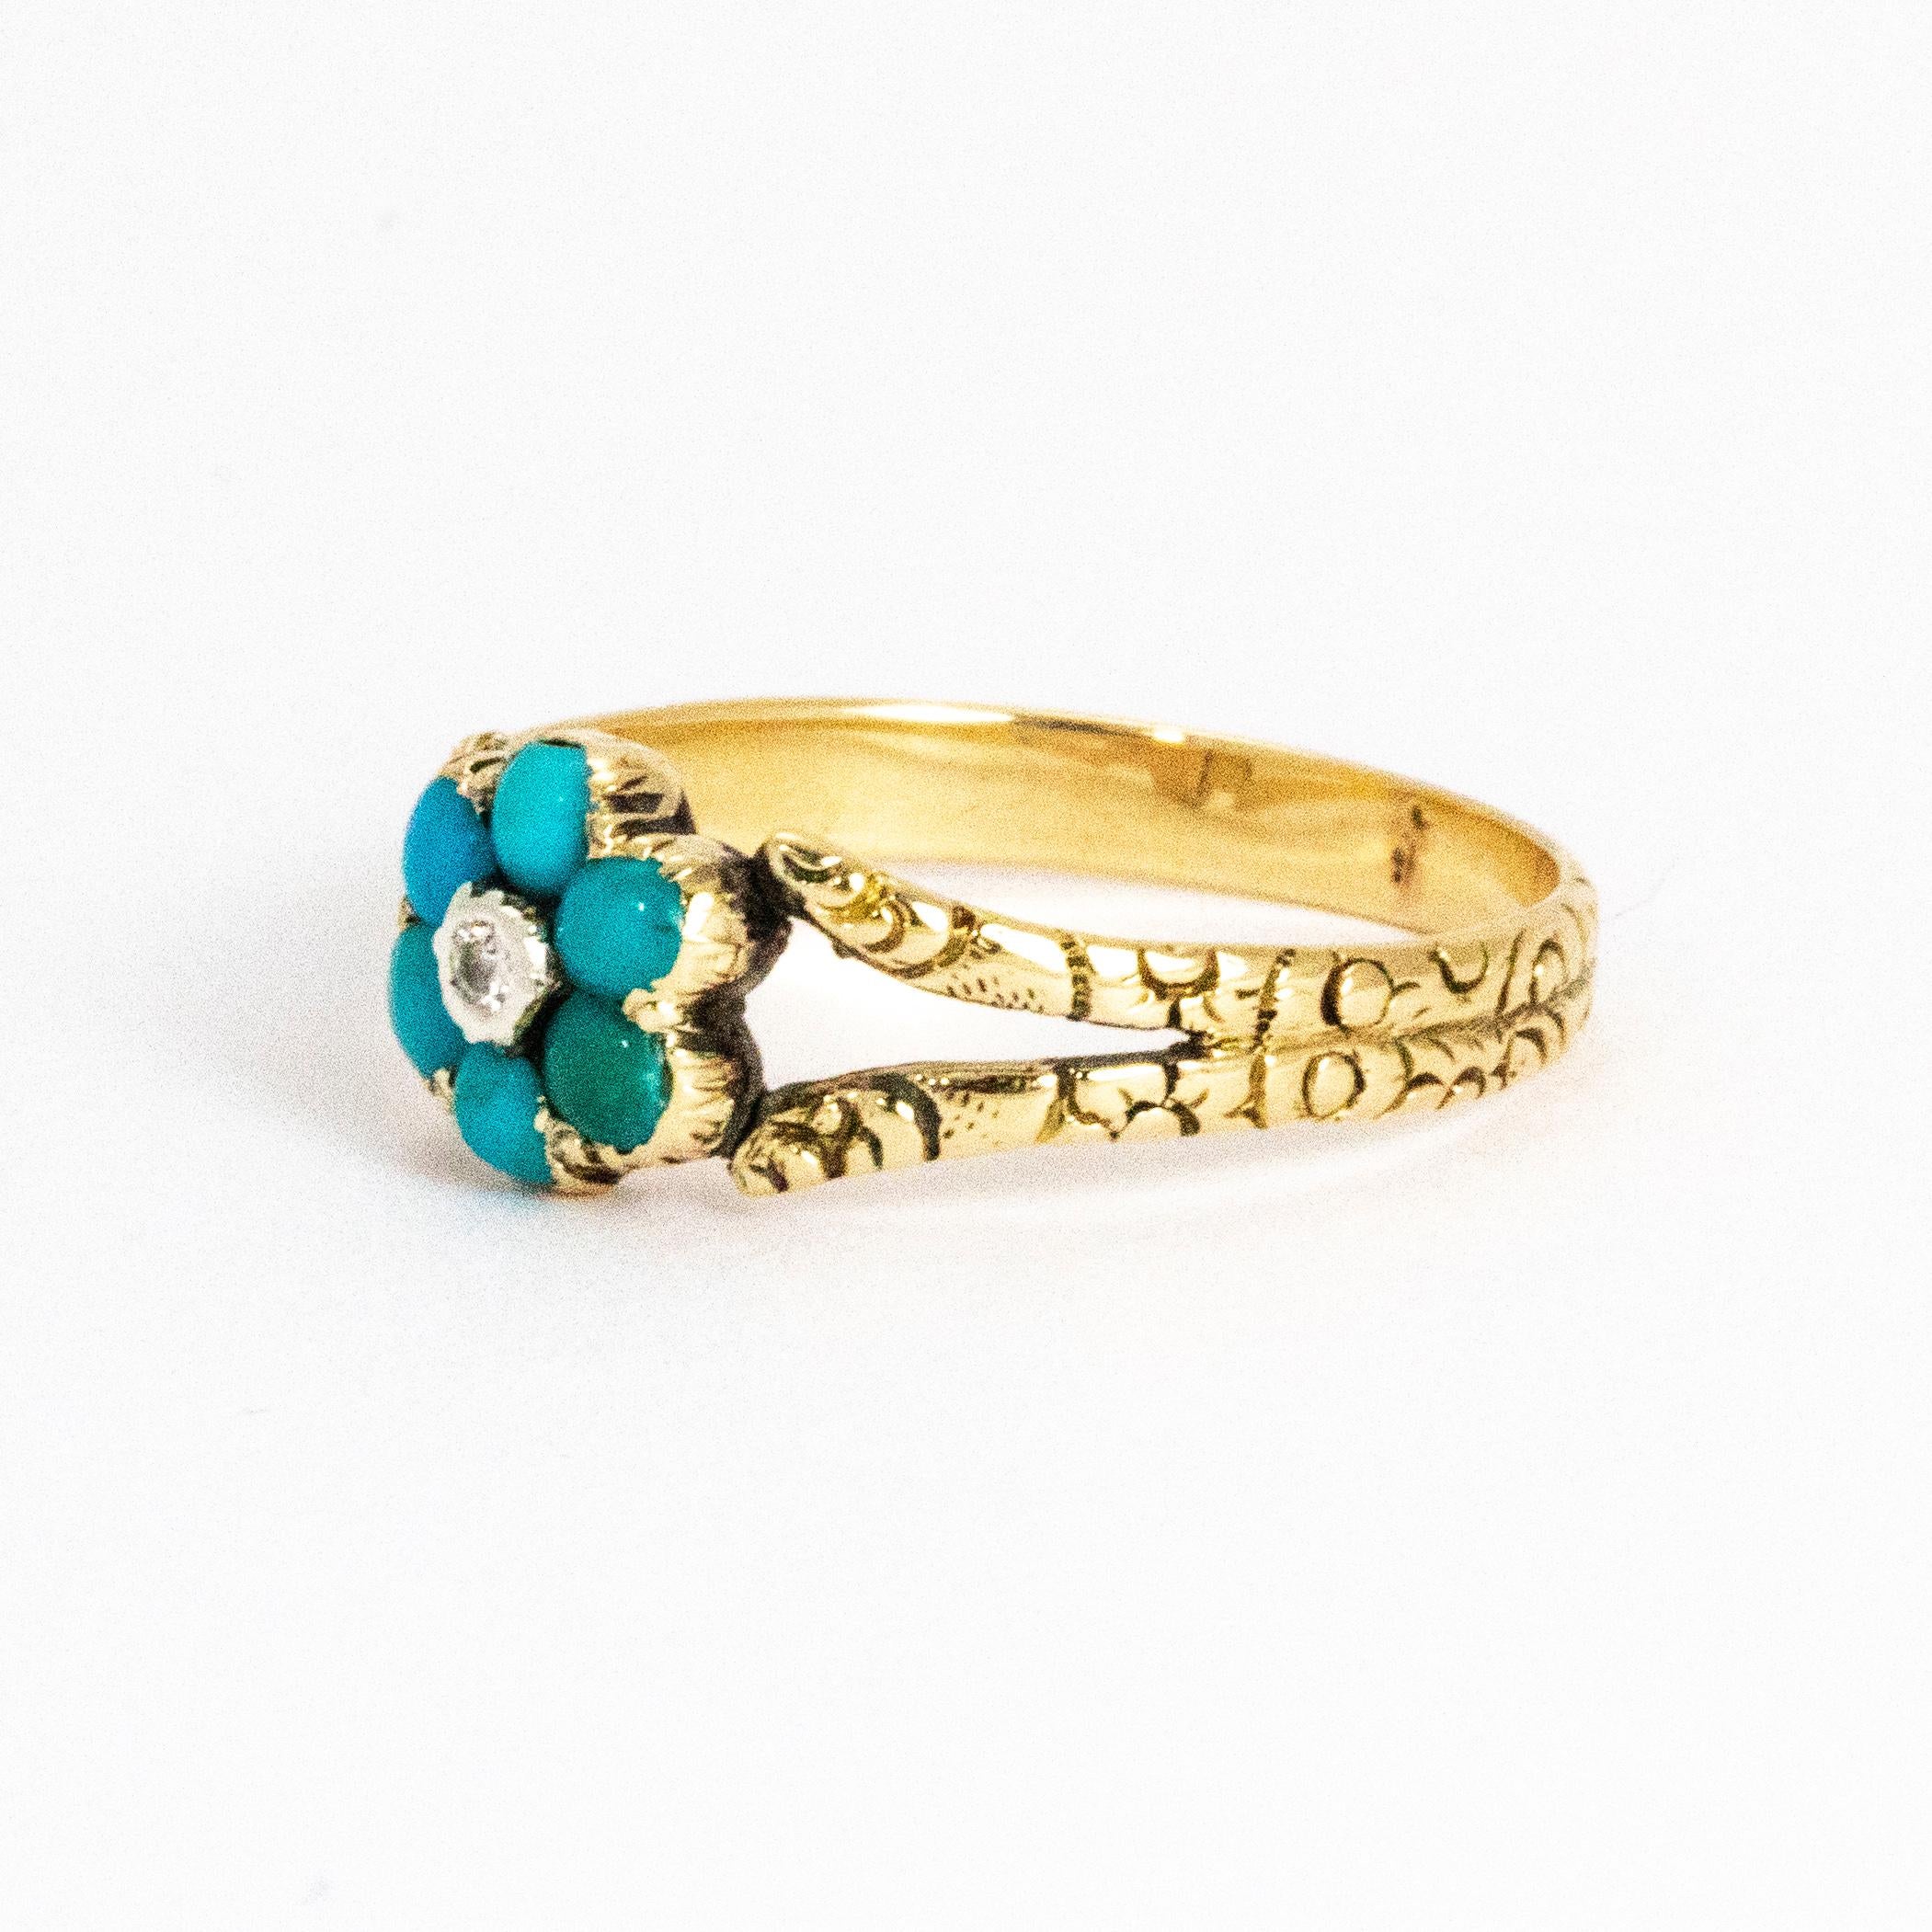 This delightful cluster ring holds six bright turquoise and in the middle sits a shimmering diamond. The ring is modelled out of 15ct gold and is beautifully engraved all the way around the band.

Ring Size: N or 6 3/4